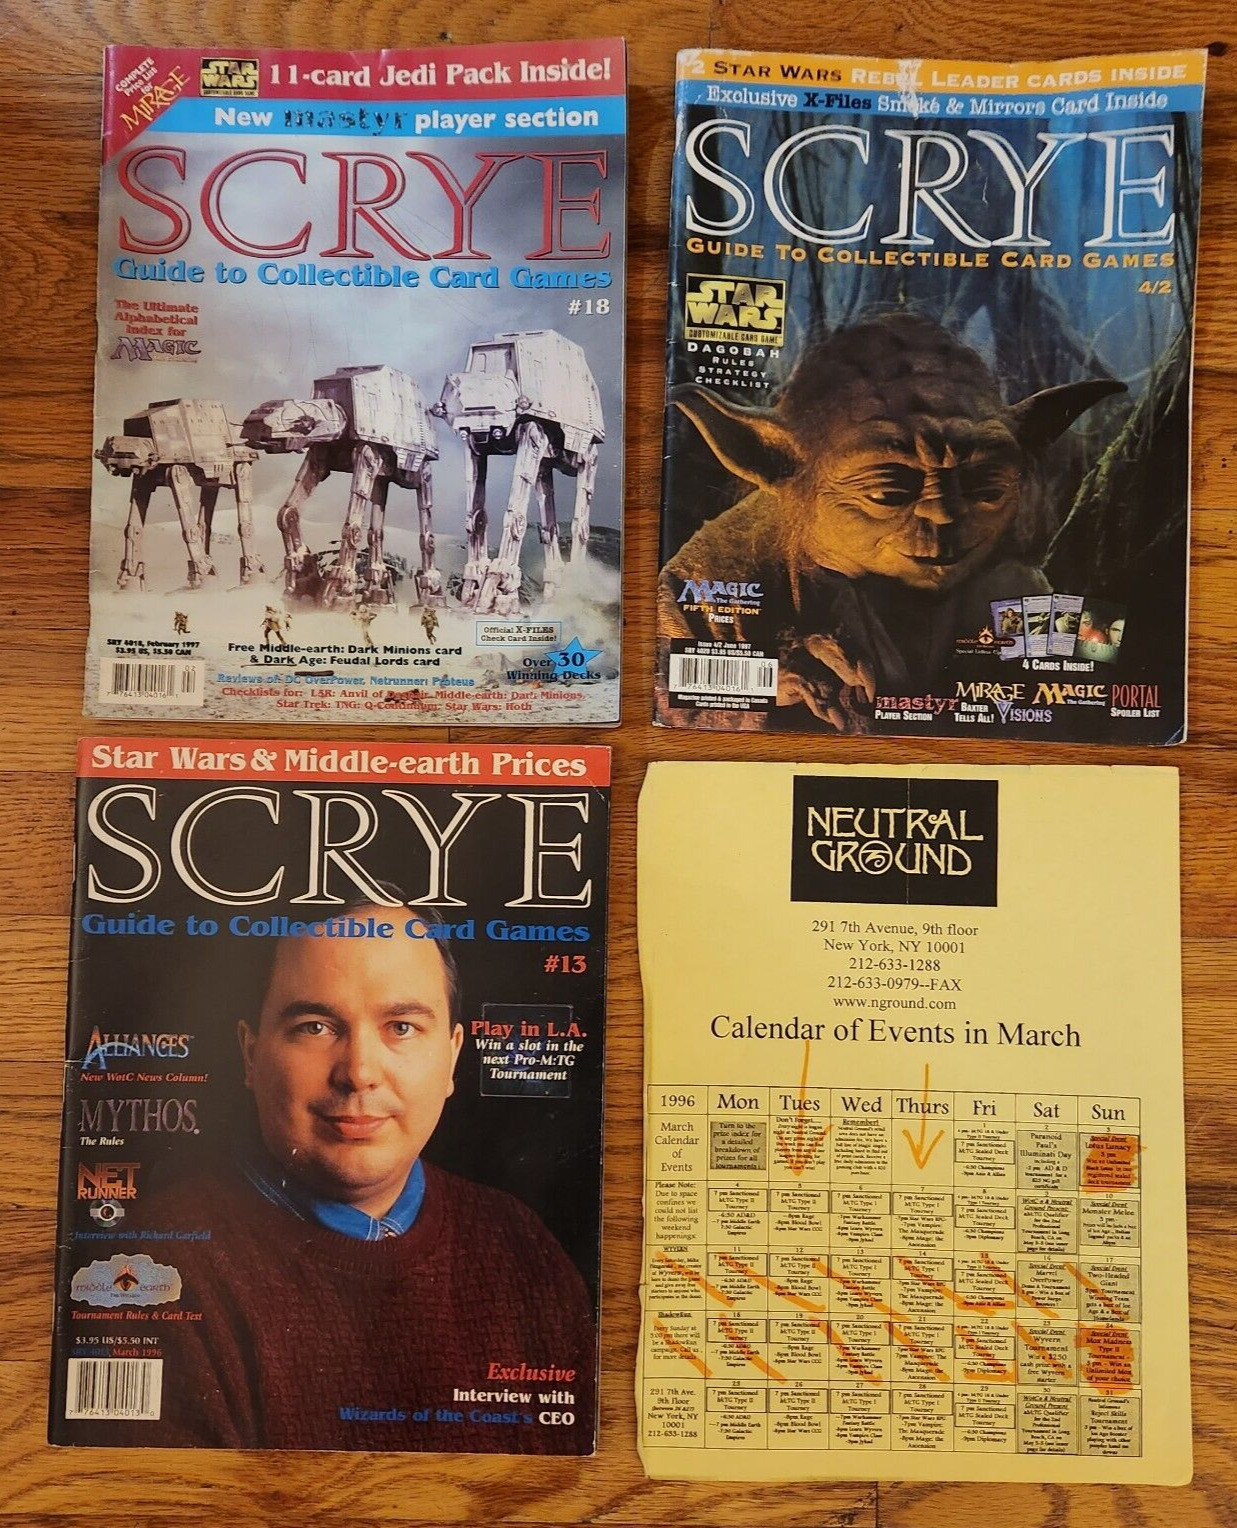 Lot of 3 SCRYE Magazines #18 Star Wars Jedi Pack , Star Wars 4/2 and #13